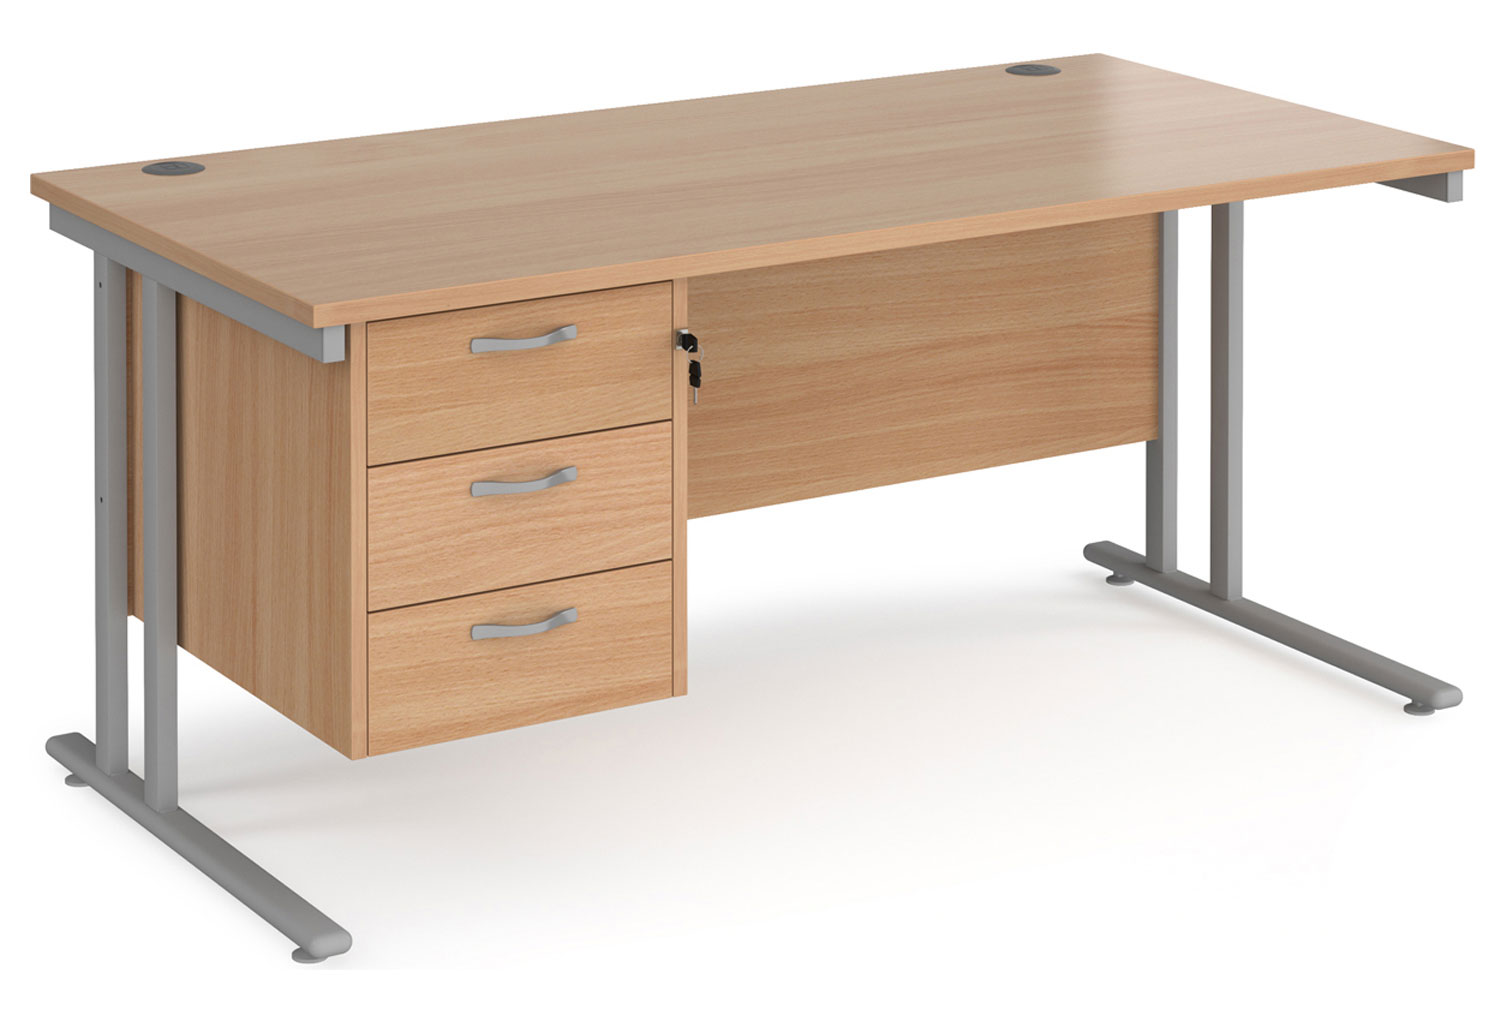 Value Line Deluxe C-Leg Rectangular Office Desk 3 Drawers (Silver Legs), 160wx80dx73h (cm), Beech, Express Delivery